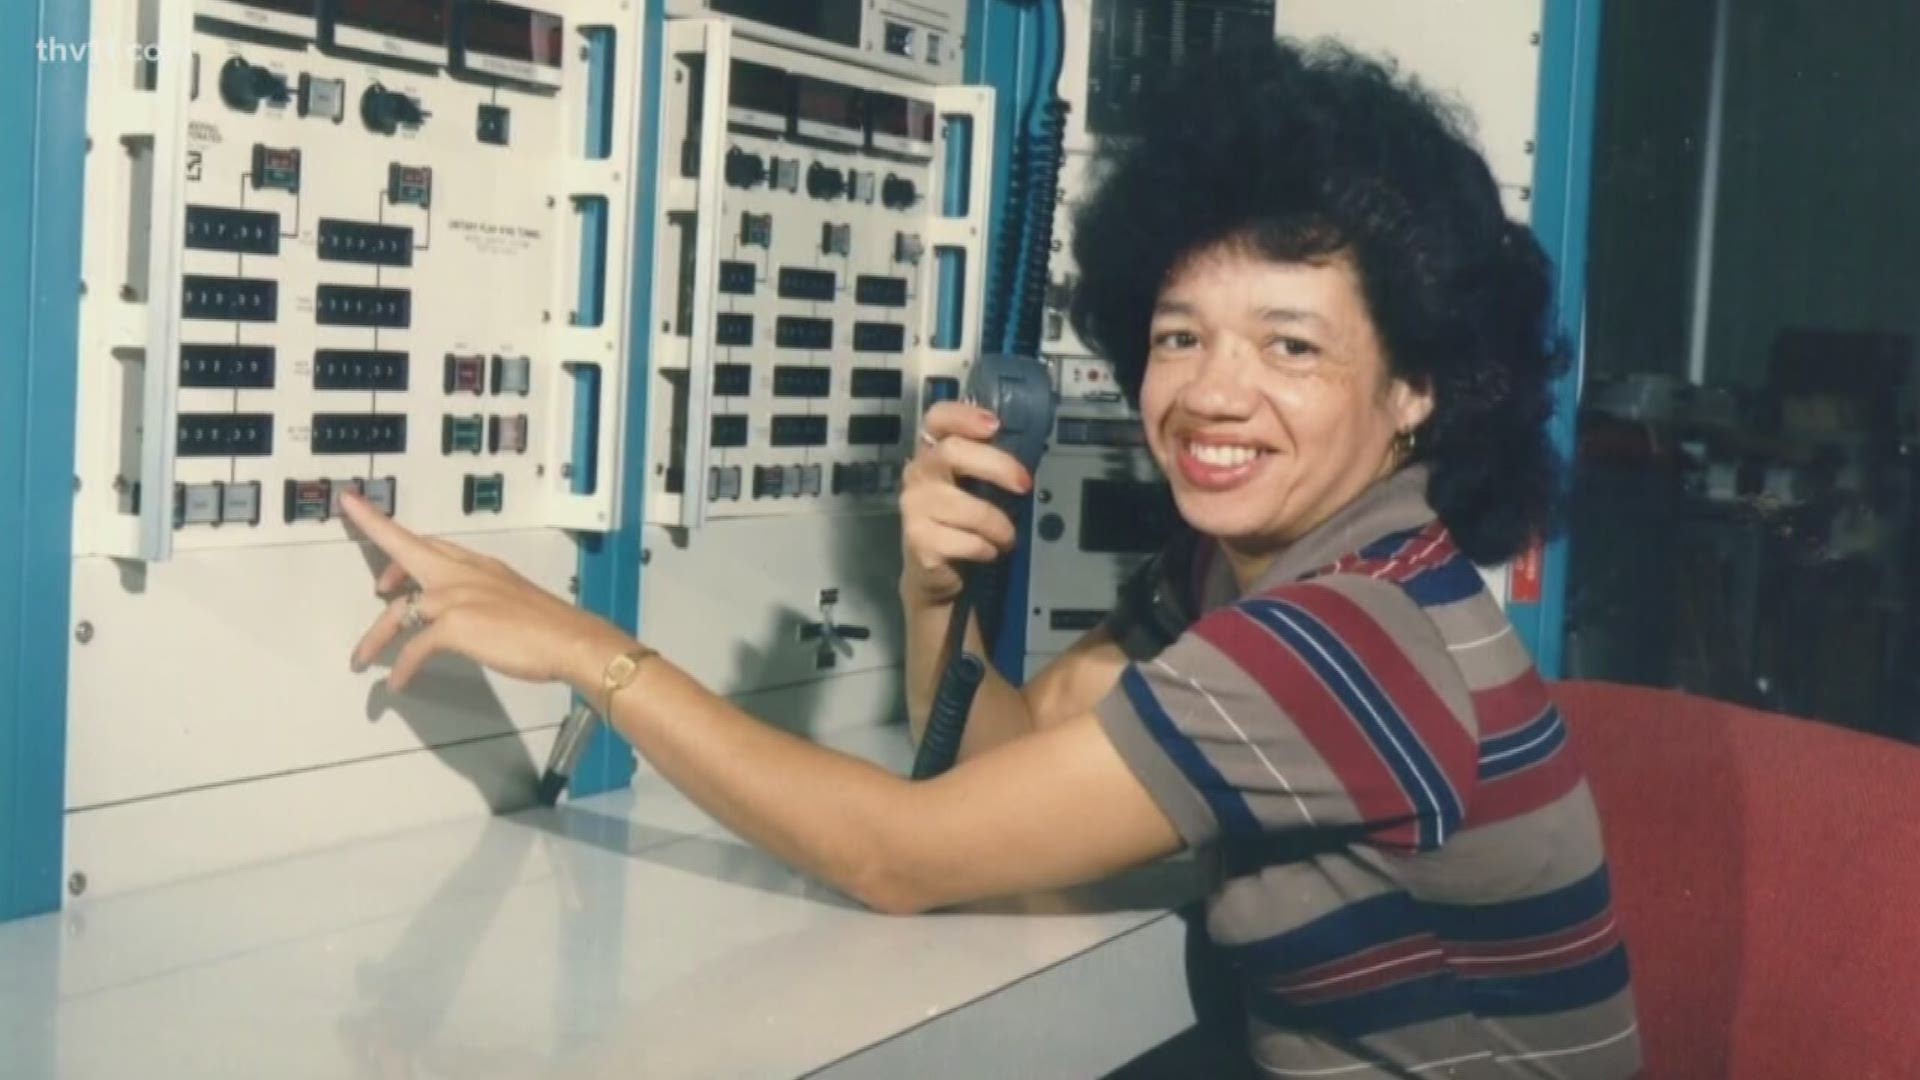 A former NASA mathematician and one of the "human computers" featured in the book "Hidden Figures" is speaking at Harding University.